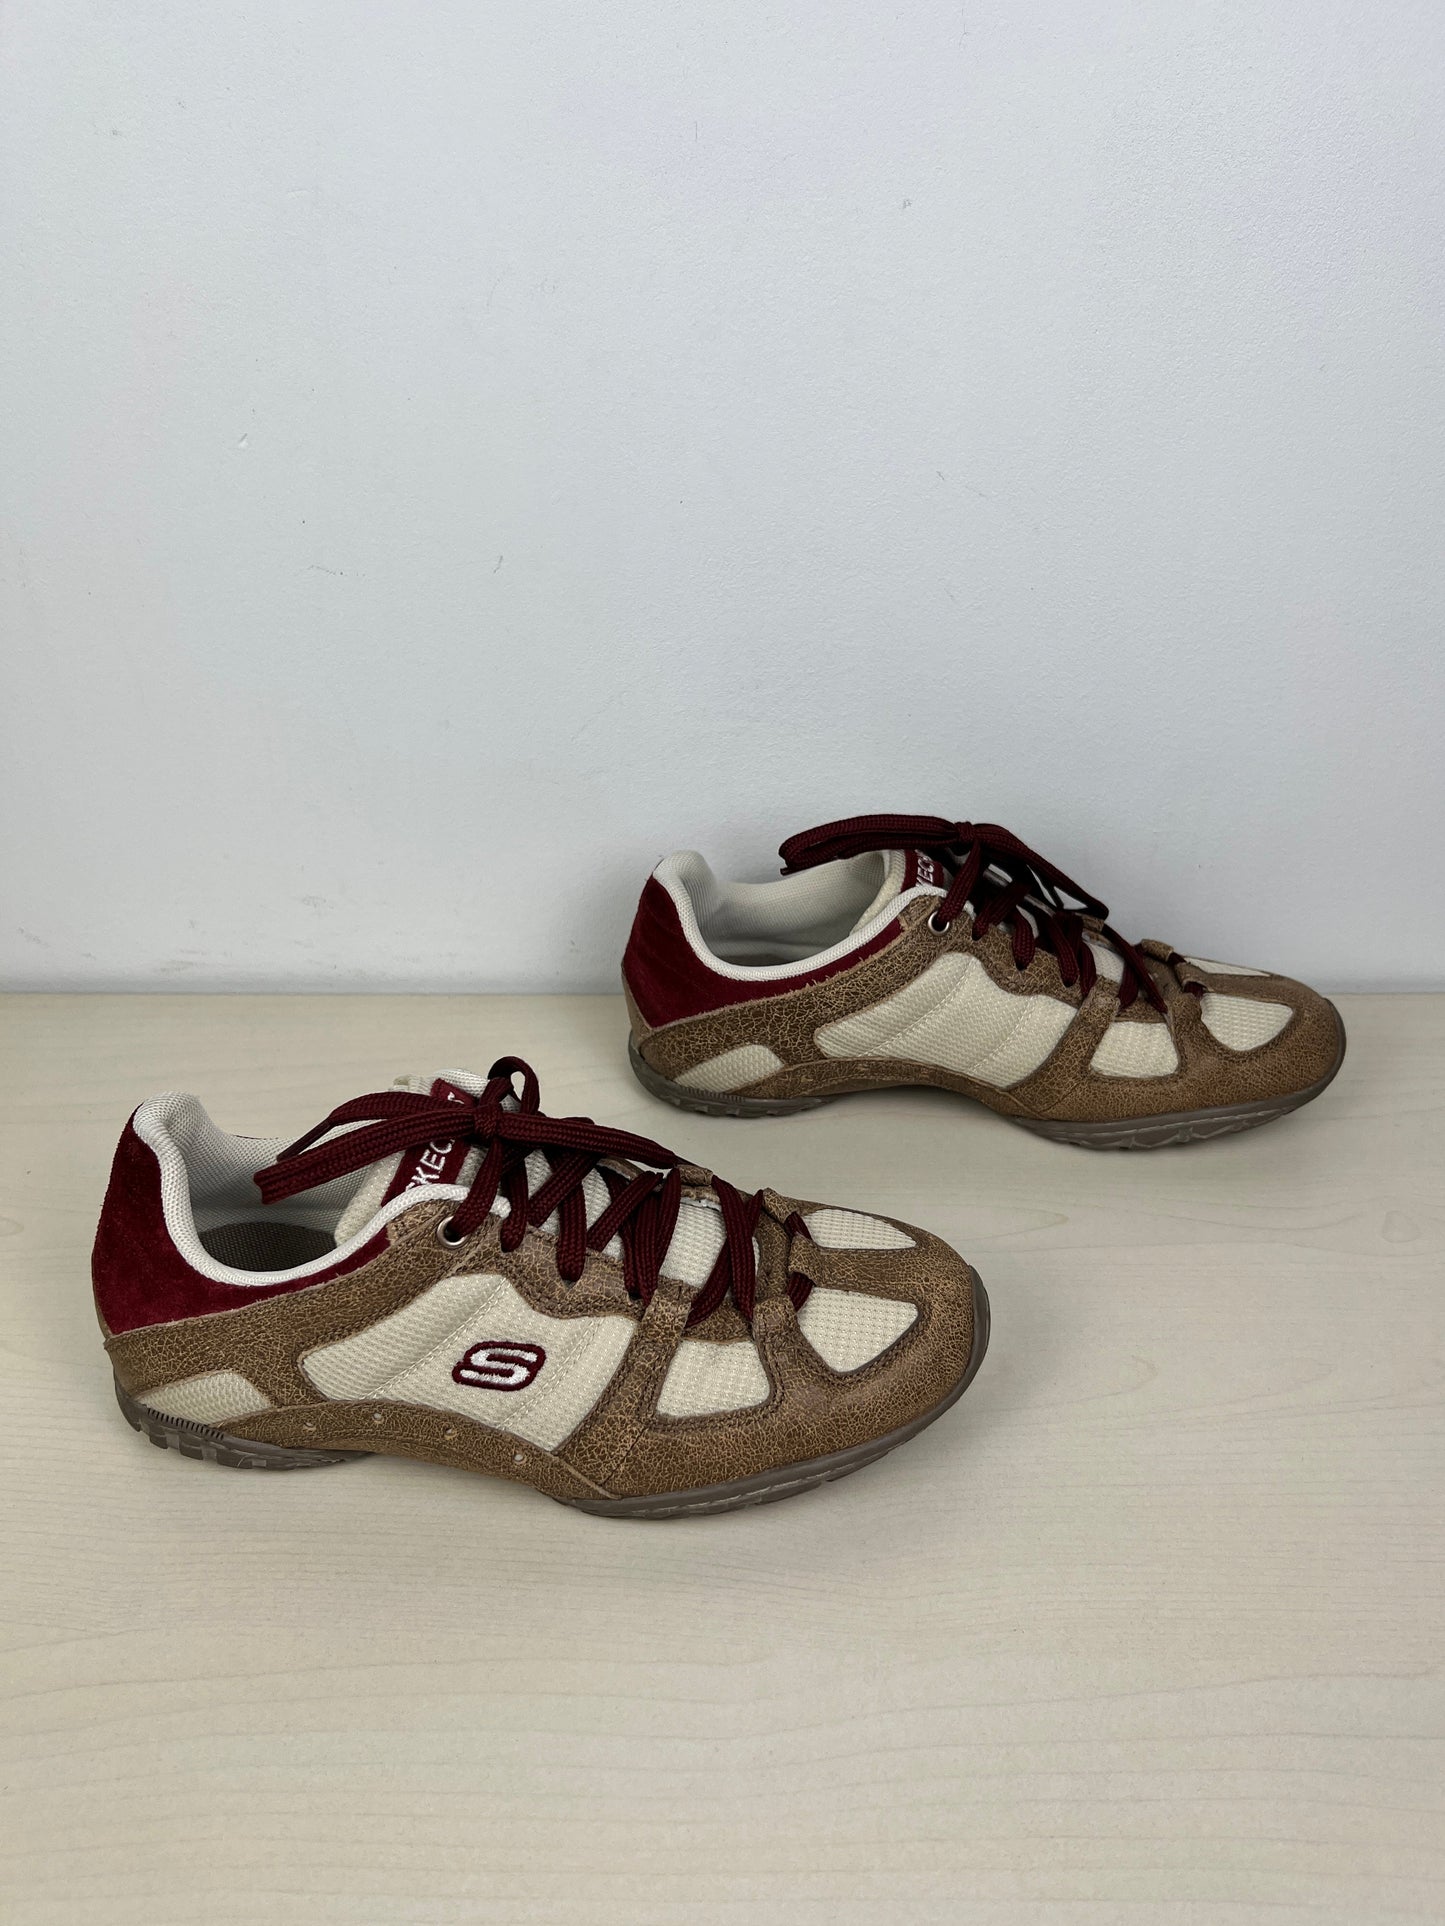 Brown Shoes Athletic Skechers, Size 6.5